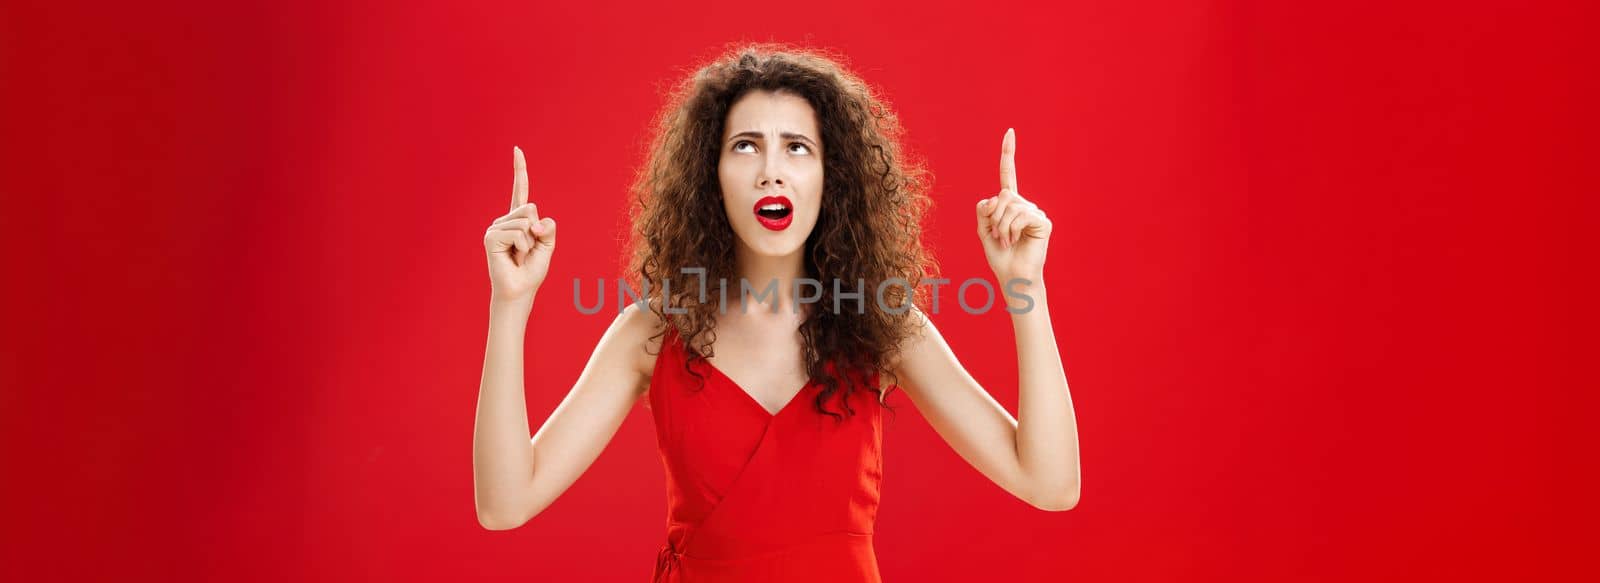 Troubled woman cannot understand what happening. Portrait of clueless silly european female with curly hair in red dress looking and pointing up perplexed and questioned posing over studio background. Copy space